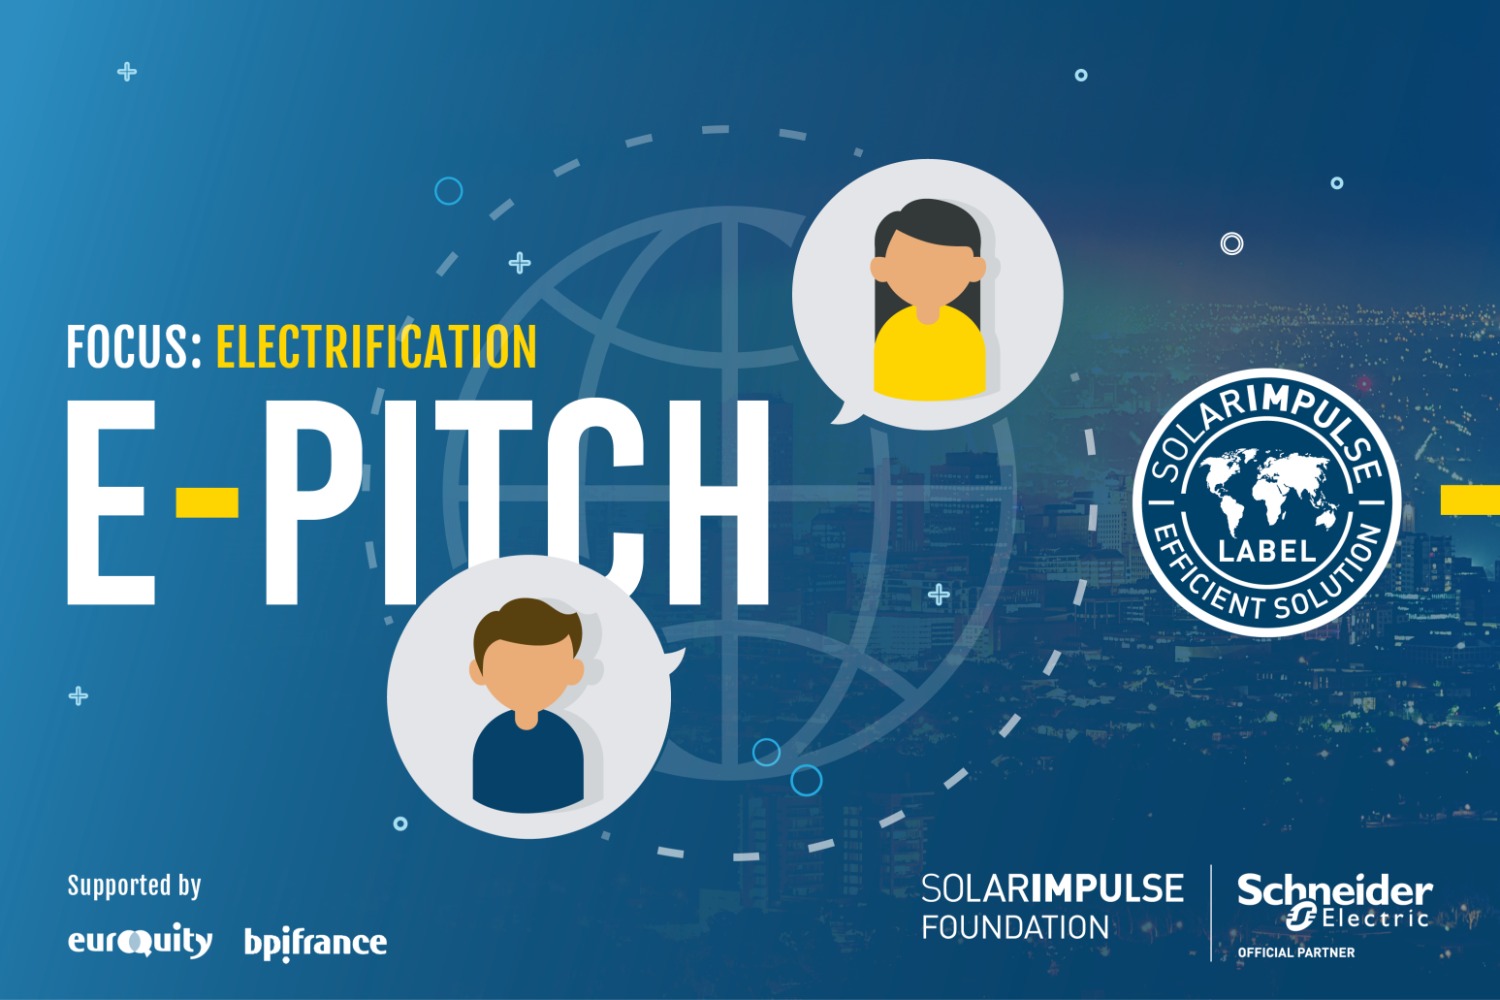 E-Pitch Solar Impulse Investment - "Electrification in a Decarbonised World"